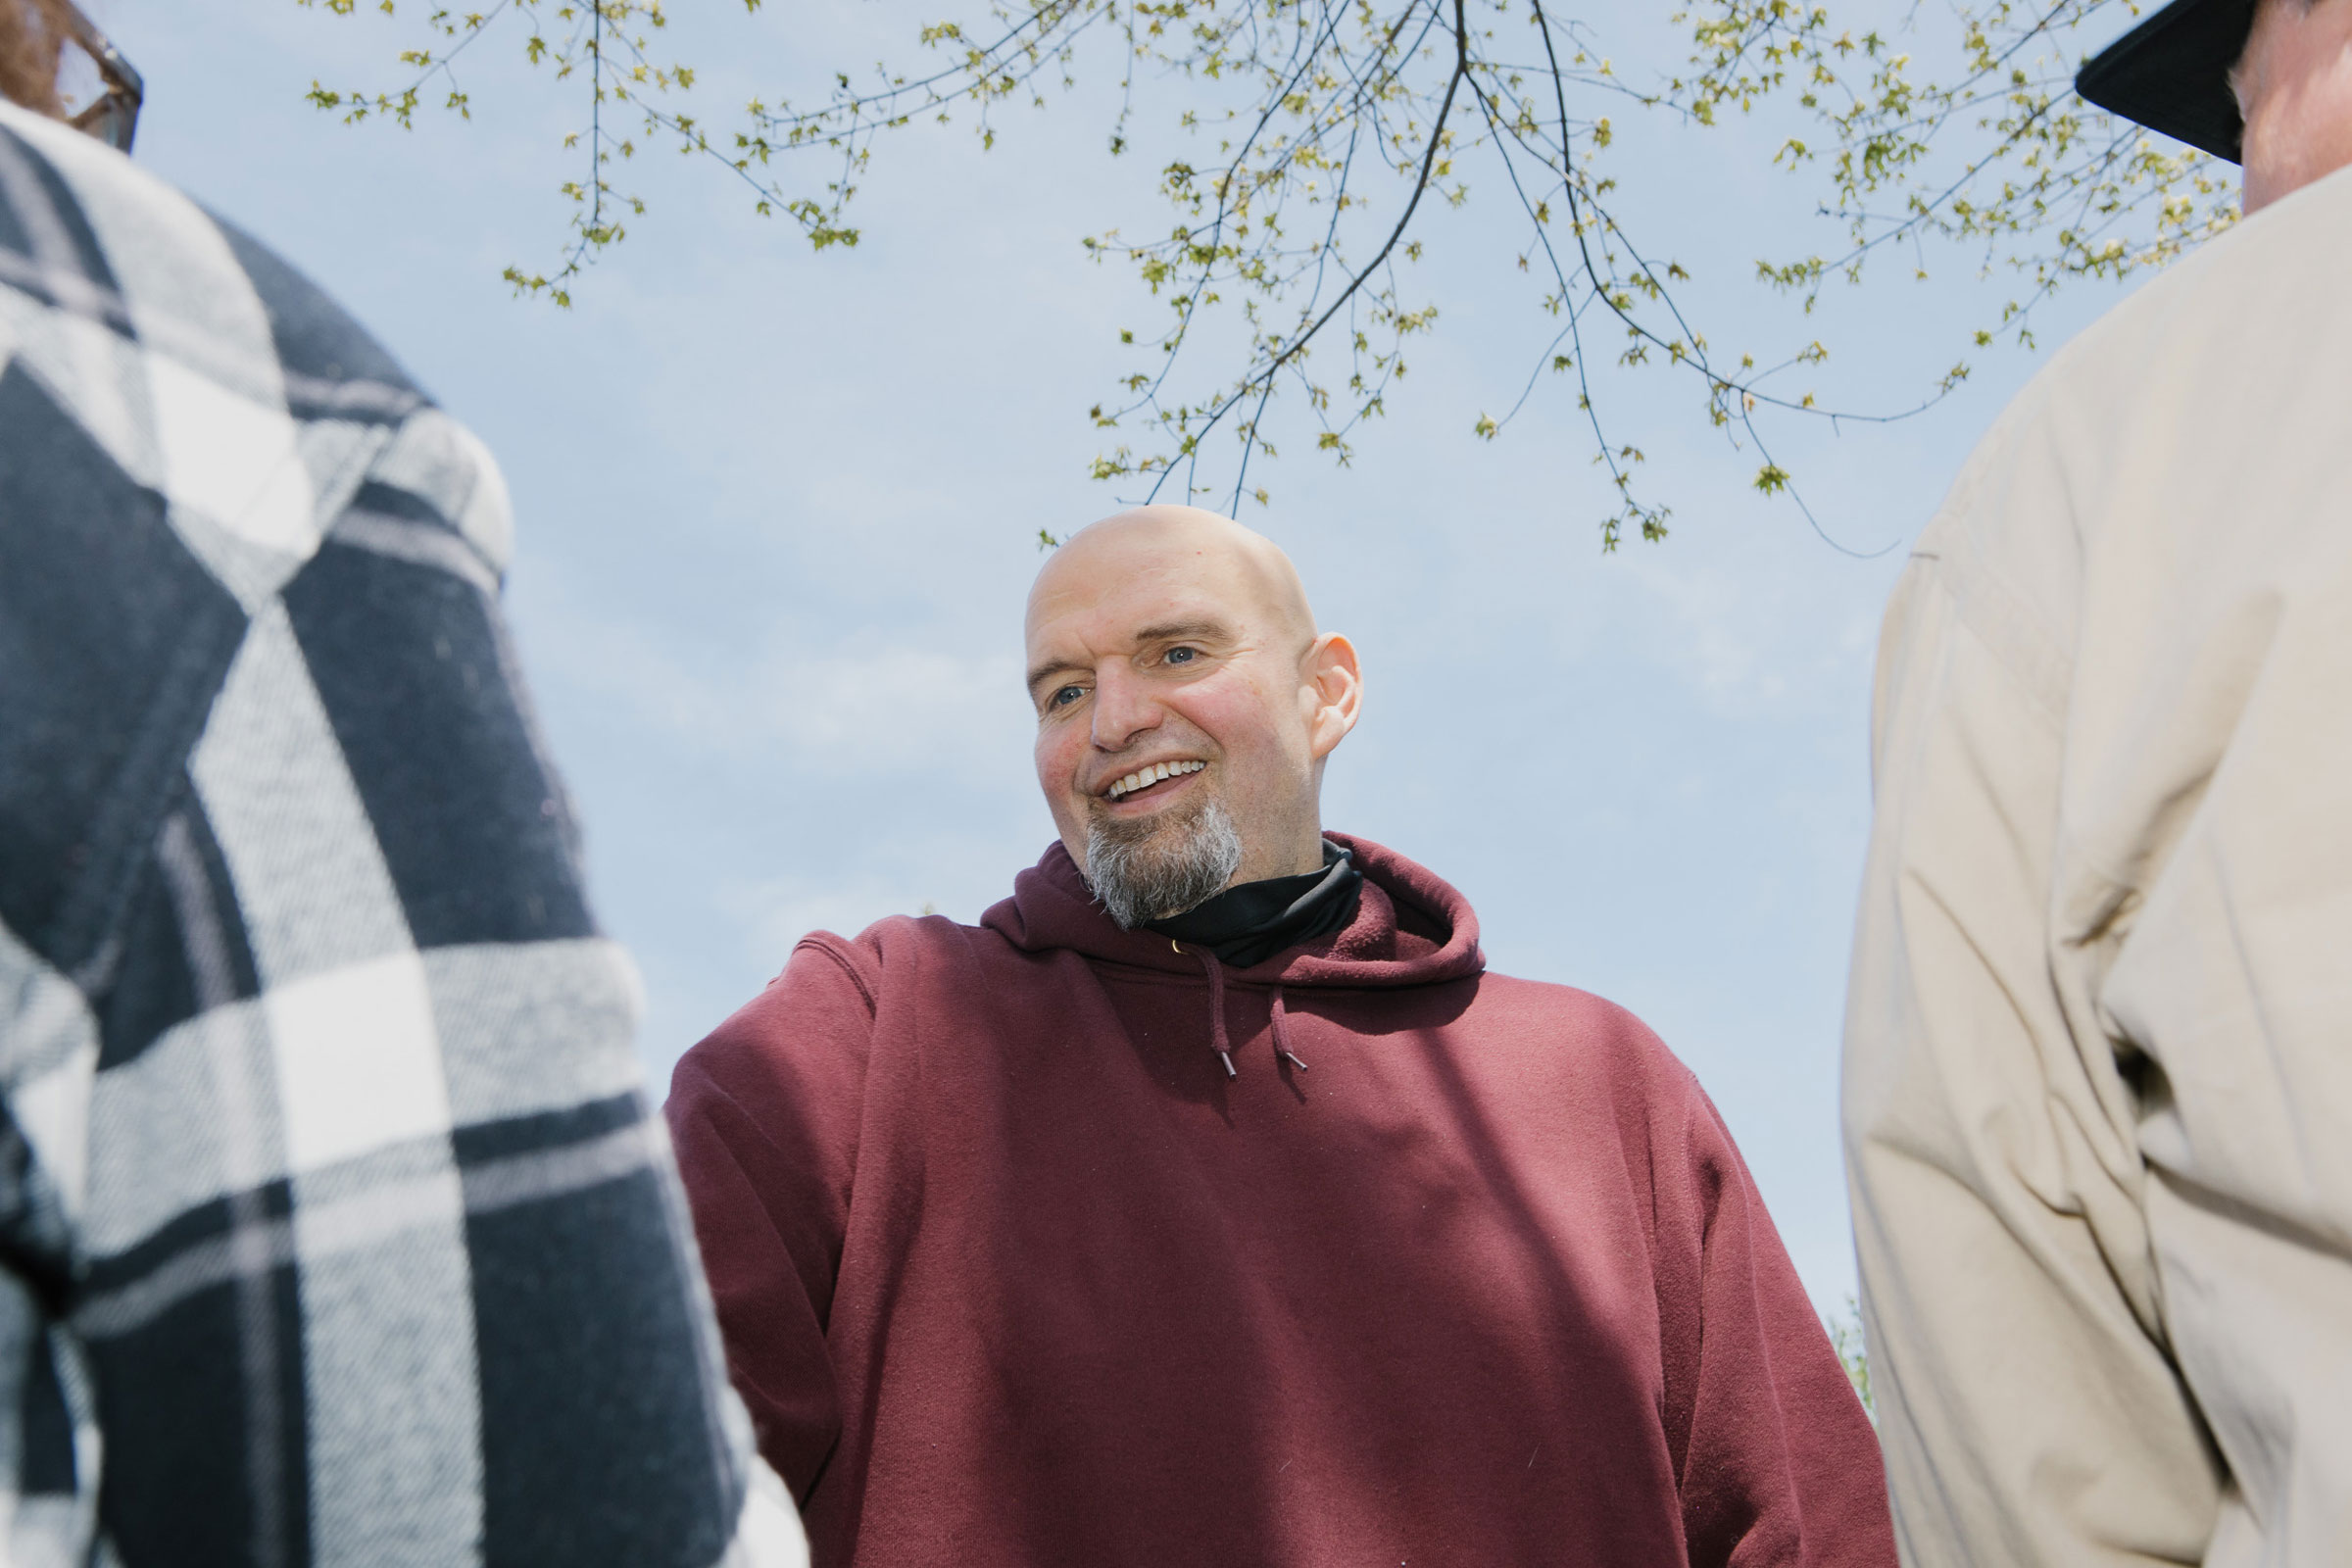 John Fetterman, lieutenant governor of Pennsylvania and Democratic senate candidate, speaks with attendees during a campaign event in Lebanon, Pennsylvania, U.S., on Saturday, April 30, 2022. (Michelle Gustafson—Bloomberg/Getty Images)